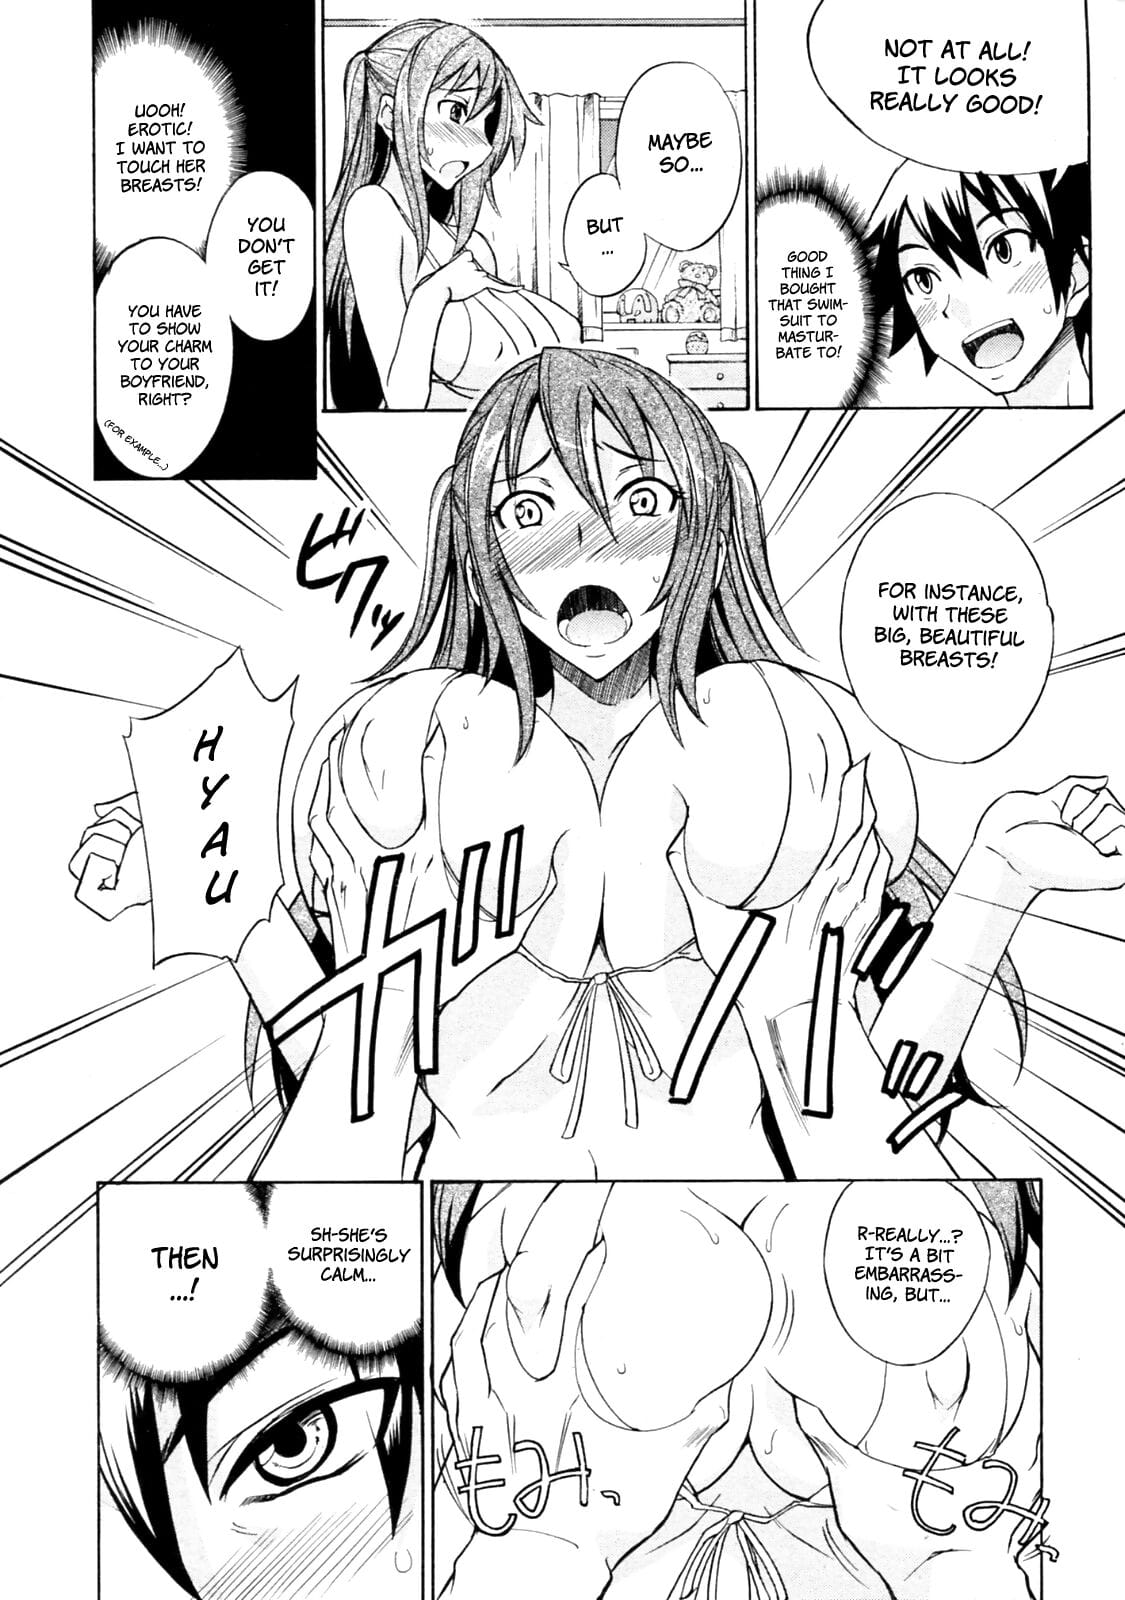 Mizugi to Onee-chan! - Swimsuit and Onee-chan! page 1